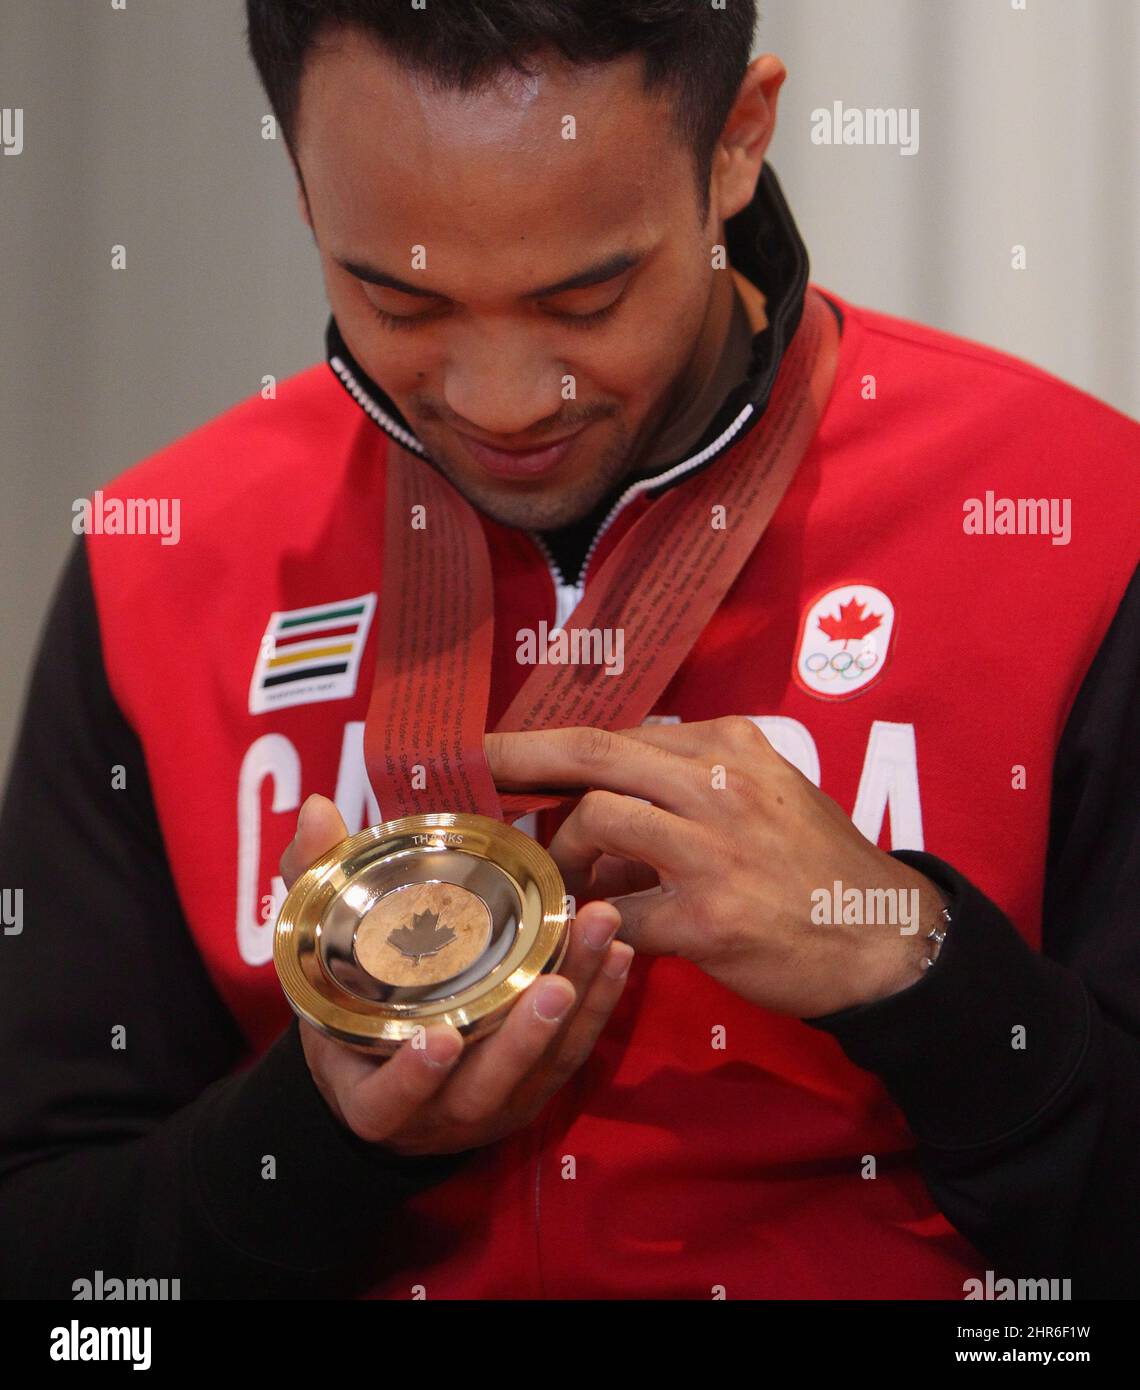 CORRETED VERSION - CORRECTS SPELLING OF NAME - Gilmore Junio reads the names of donors on the strap of his medal, at King Edward School, after he was presented with a commemorative crowdsourced Medal of Thanks in Kitchener, Ont., Wednesday, May 14, 2014. The medal, made of Canadian Maple wood, silver and gold, was conceived by the Toronto design firm Jacknife to thank Junio for his selfless act of stepping aside for teammate Denny Morrison to skate in the 1,000 metre speed skating race at the Sochi Olypics. THE CANADIAN PRESS/Dave Chidley Stock Photo